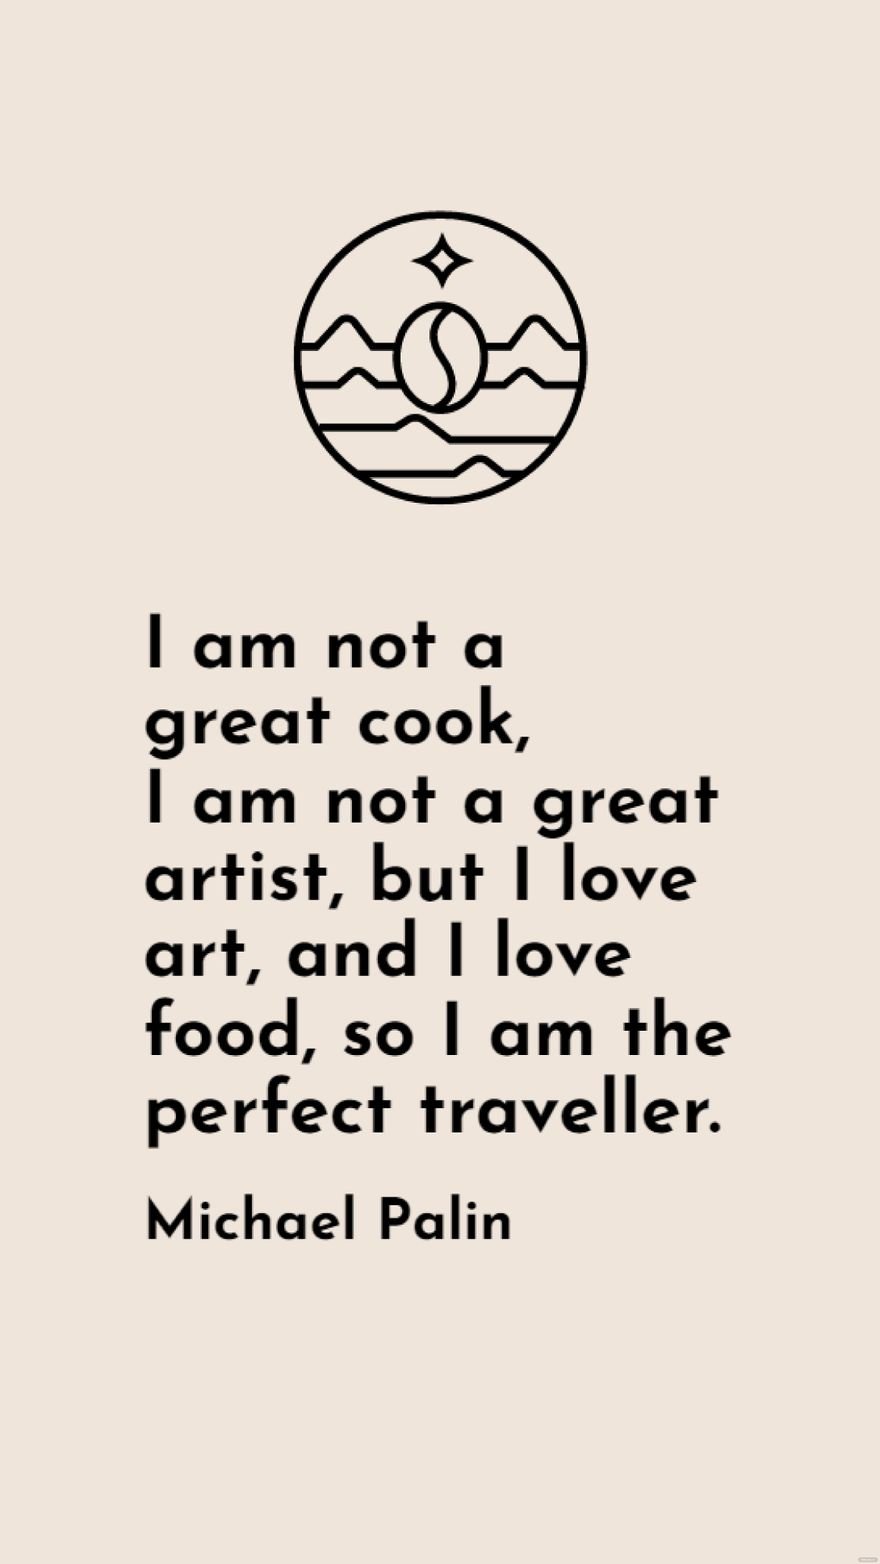 Michael Palin - I am not a great cook, I am not a great artist, but I love art, and I love food, so I am the perfect traveller.